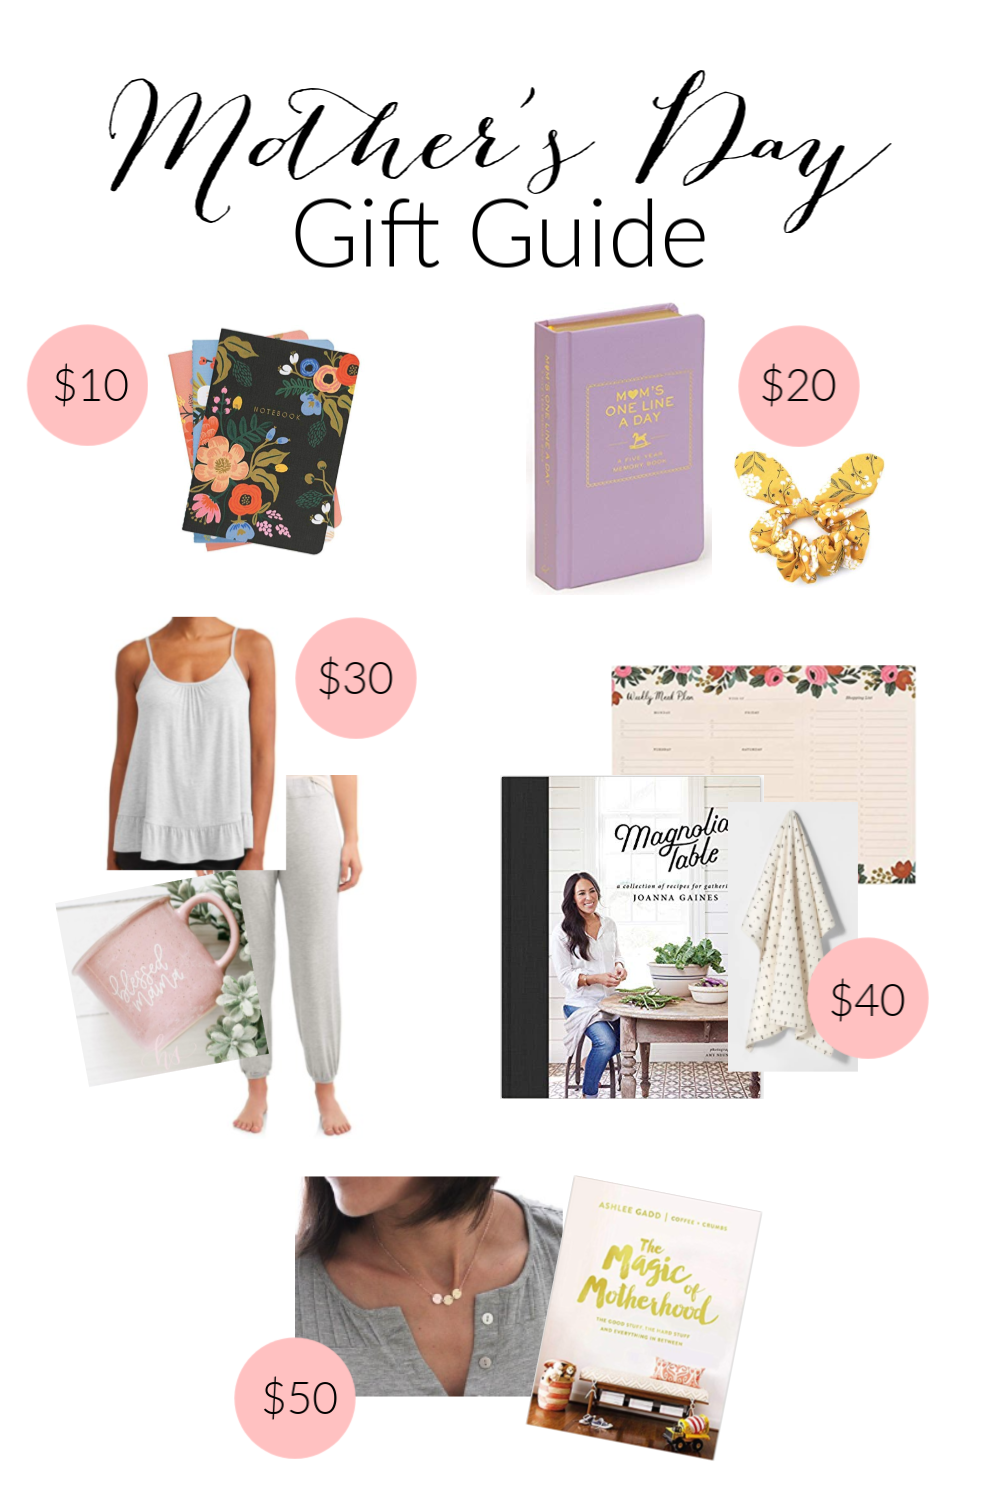 Gift Guide For Mom: 14 Gifts Any Modern Momma Would Love — Momma Society